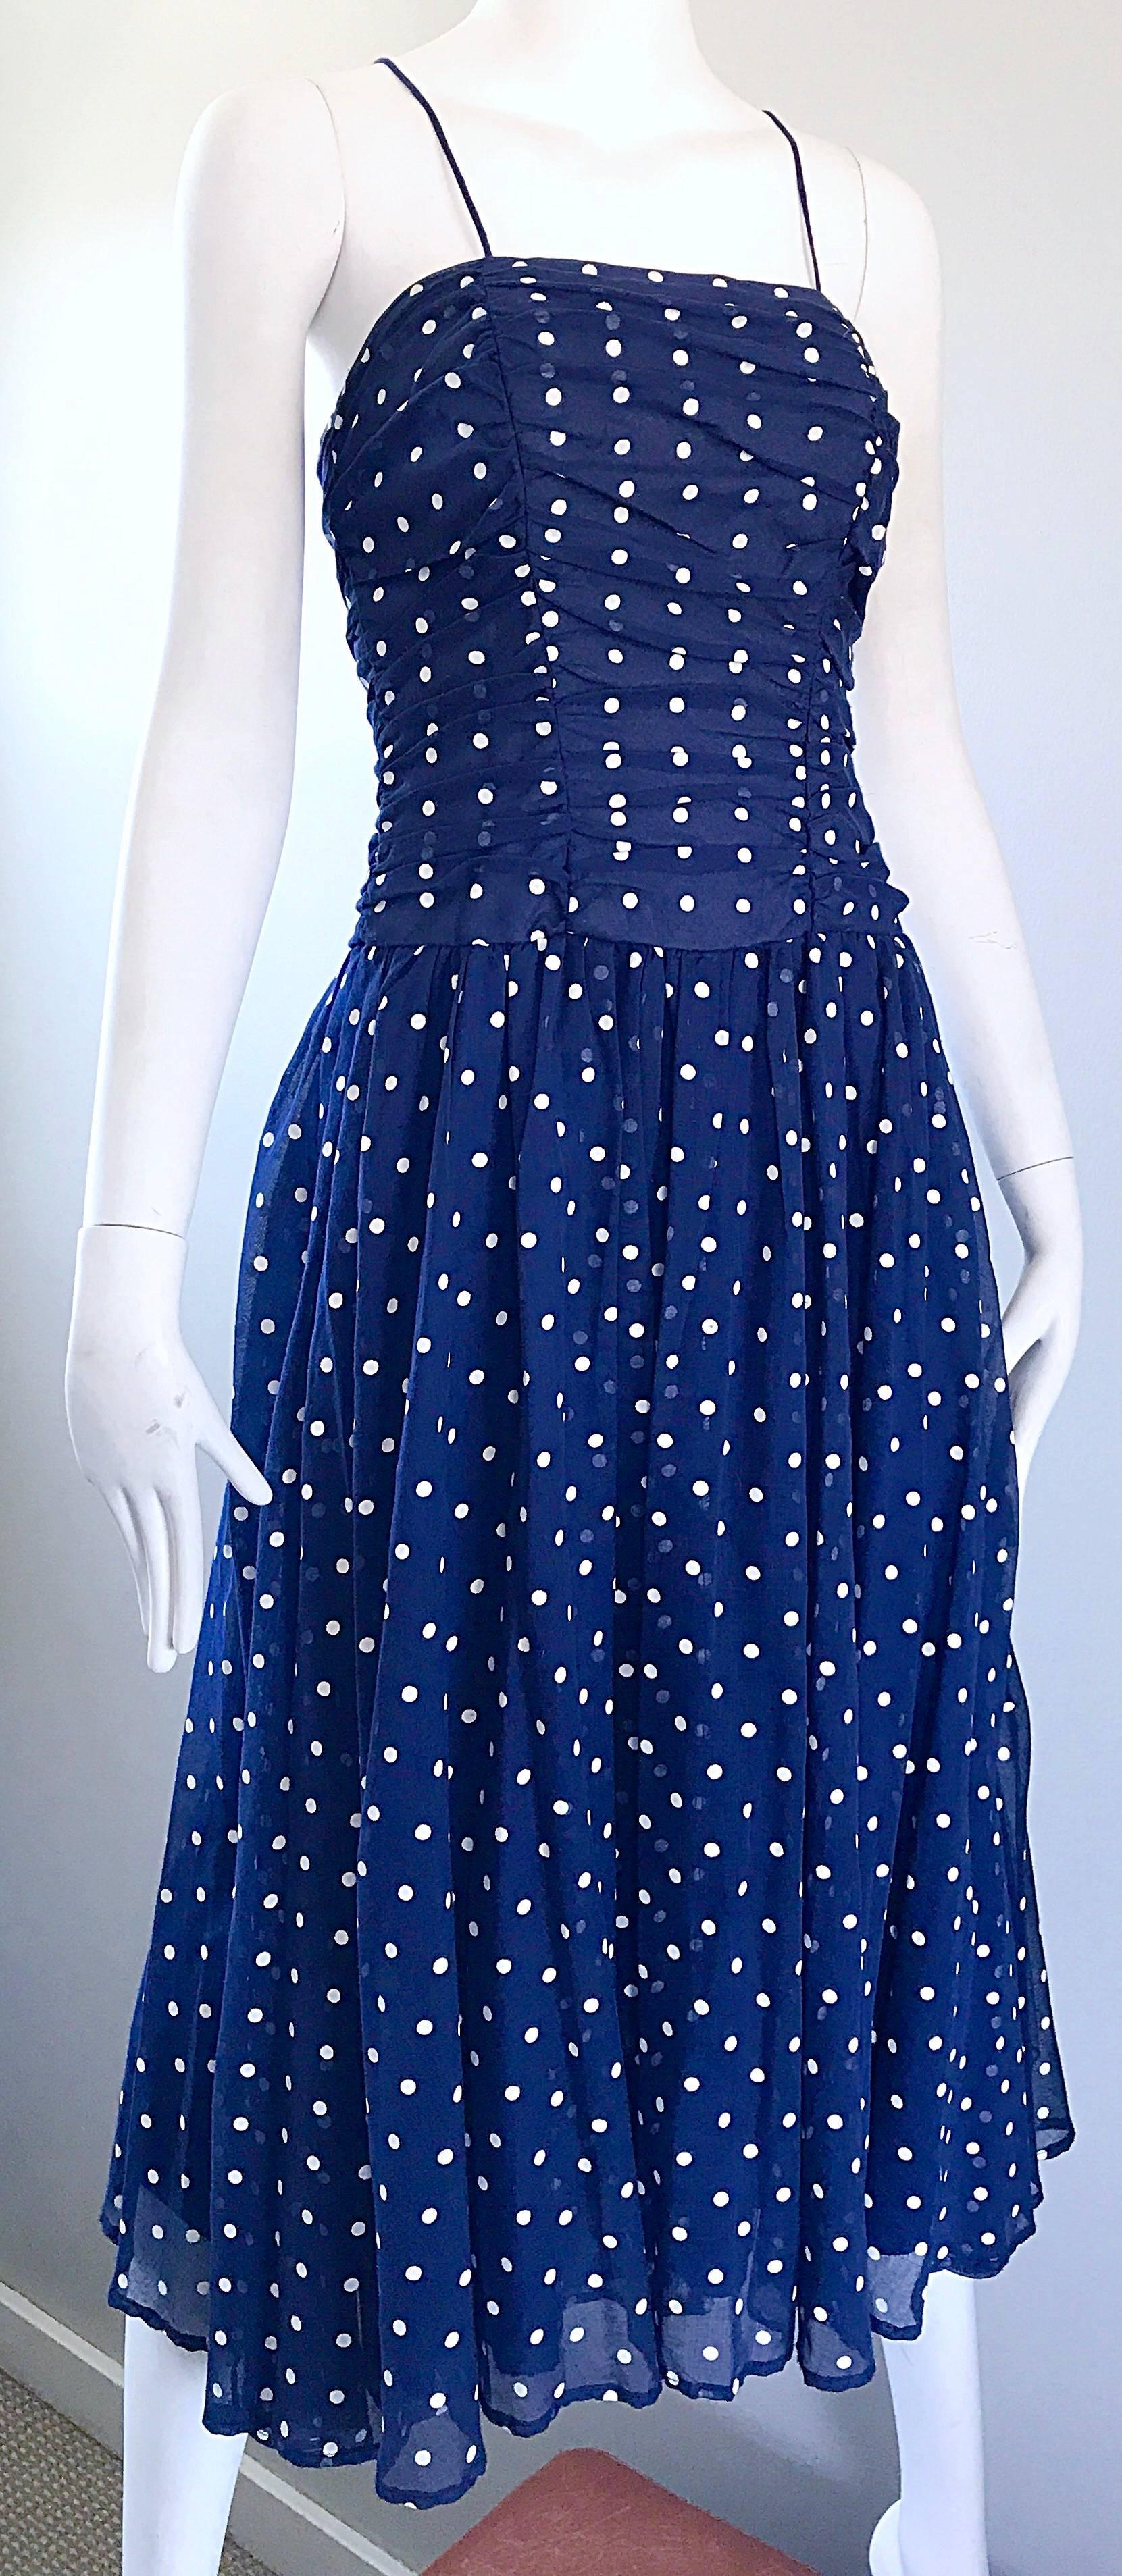 Chic Vintage Navy Blue and White Hand Painted Polka Dot Sleeveless Ruched Dress In Excellent Condition For Sale In San Diego, CA